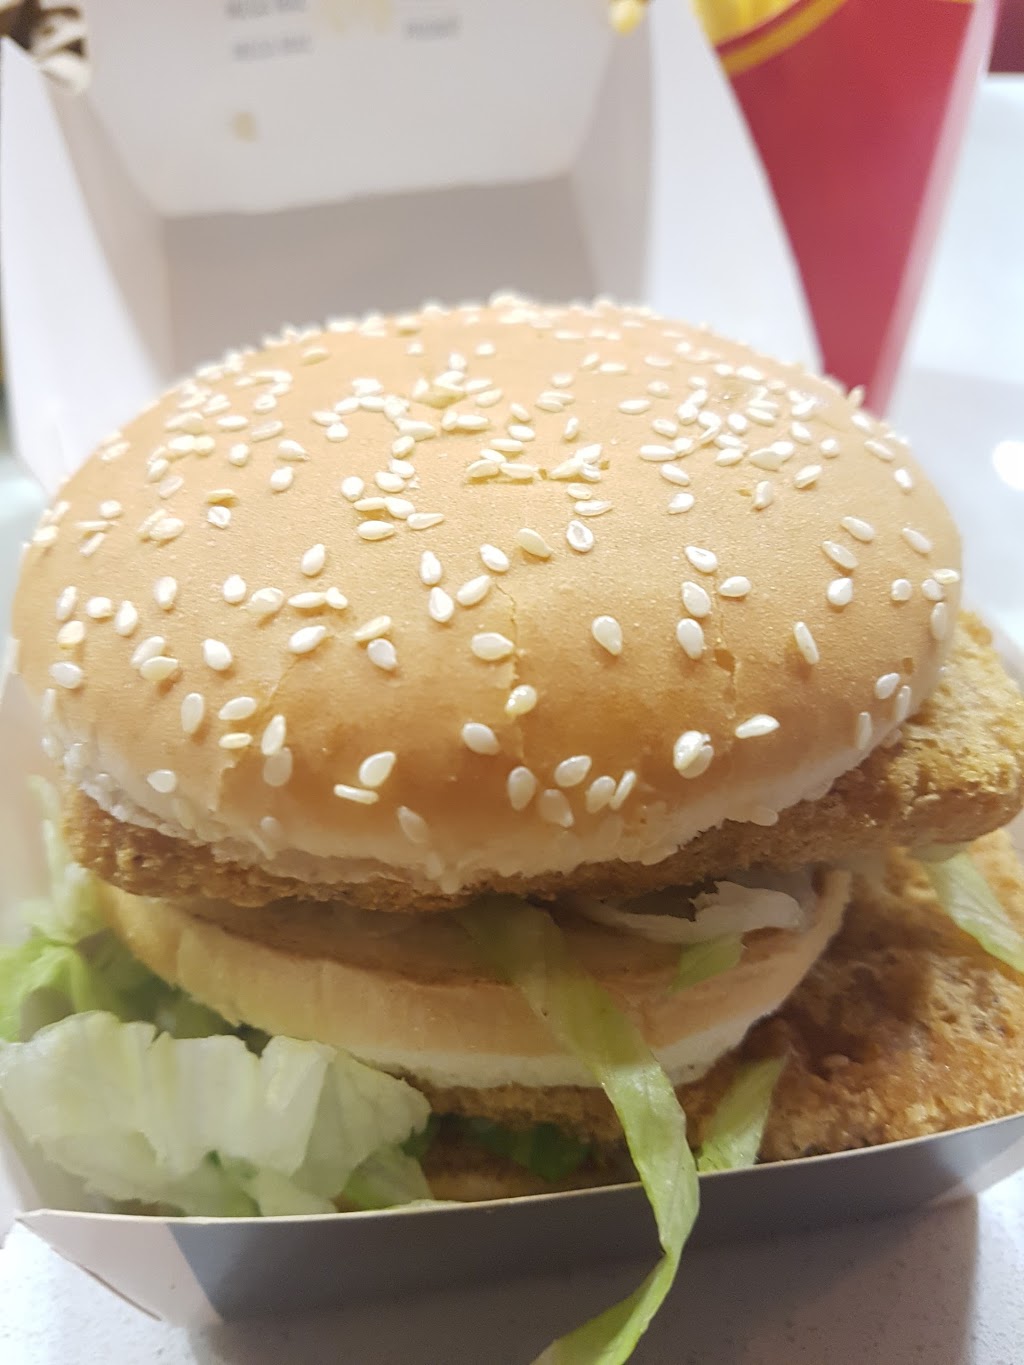 McDonalds Penrith | meal takeaway | Cnr High St &, Kendall St, Penrith NSW 2750, Australia | 0247321545 OR +61 2 4732 1545